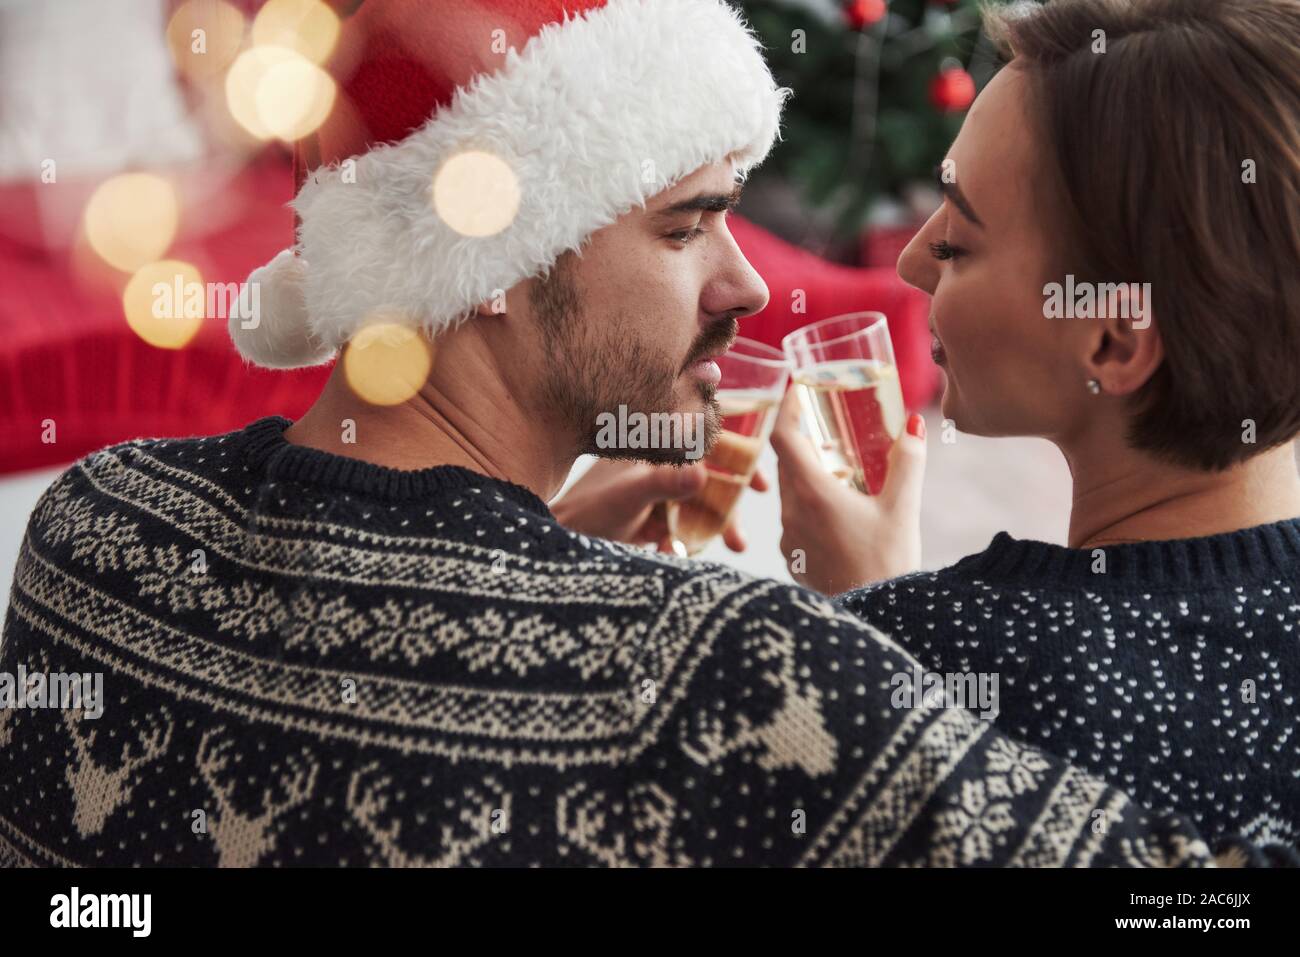 That's how love looking is. Celebrating new year. Knocking glasses. Beautiful couple in holiday clothes sits and hugs each other. Photo from the back Stock Photo